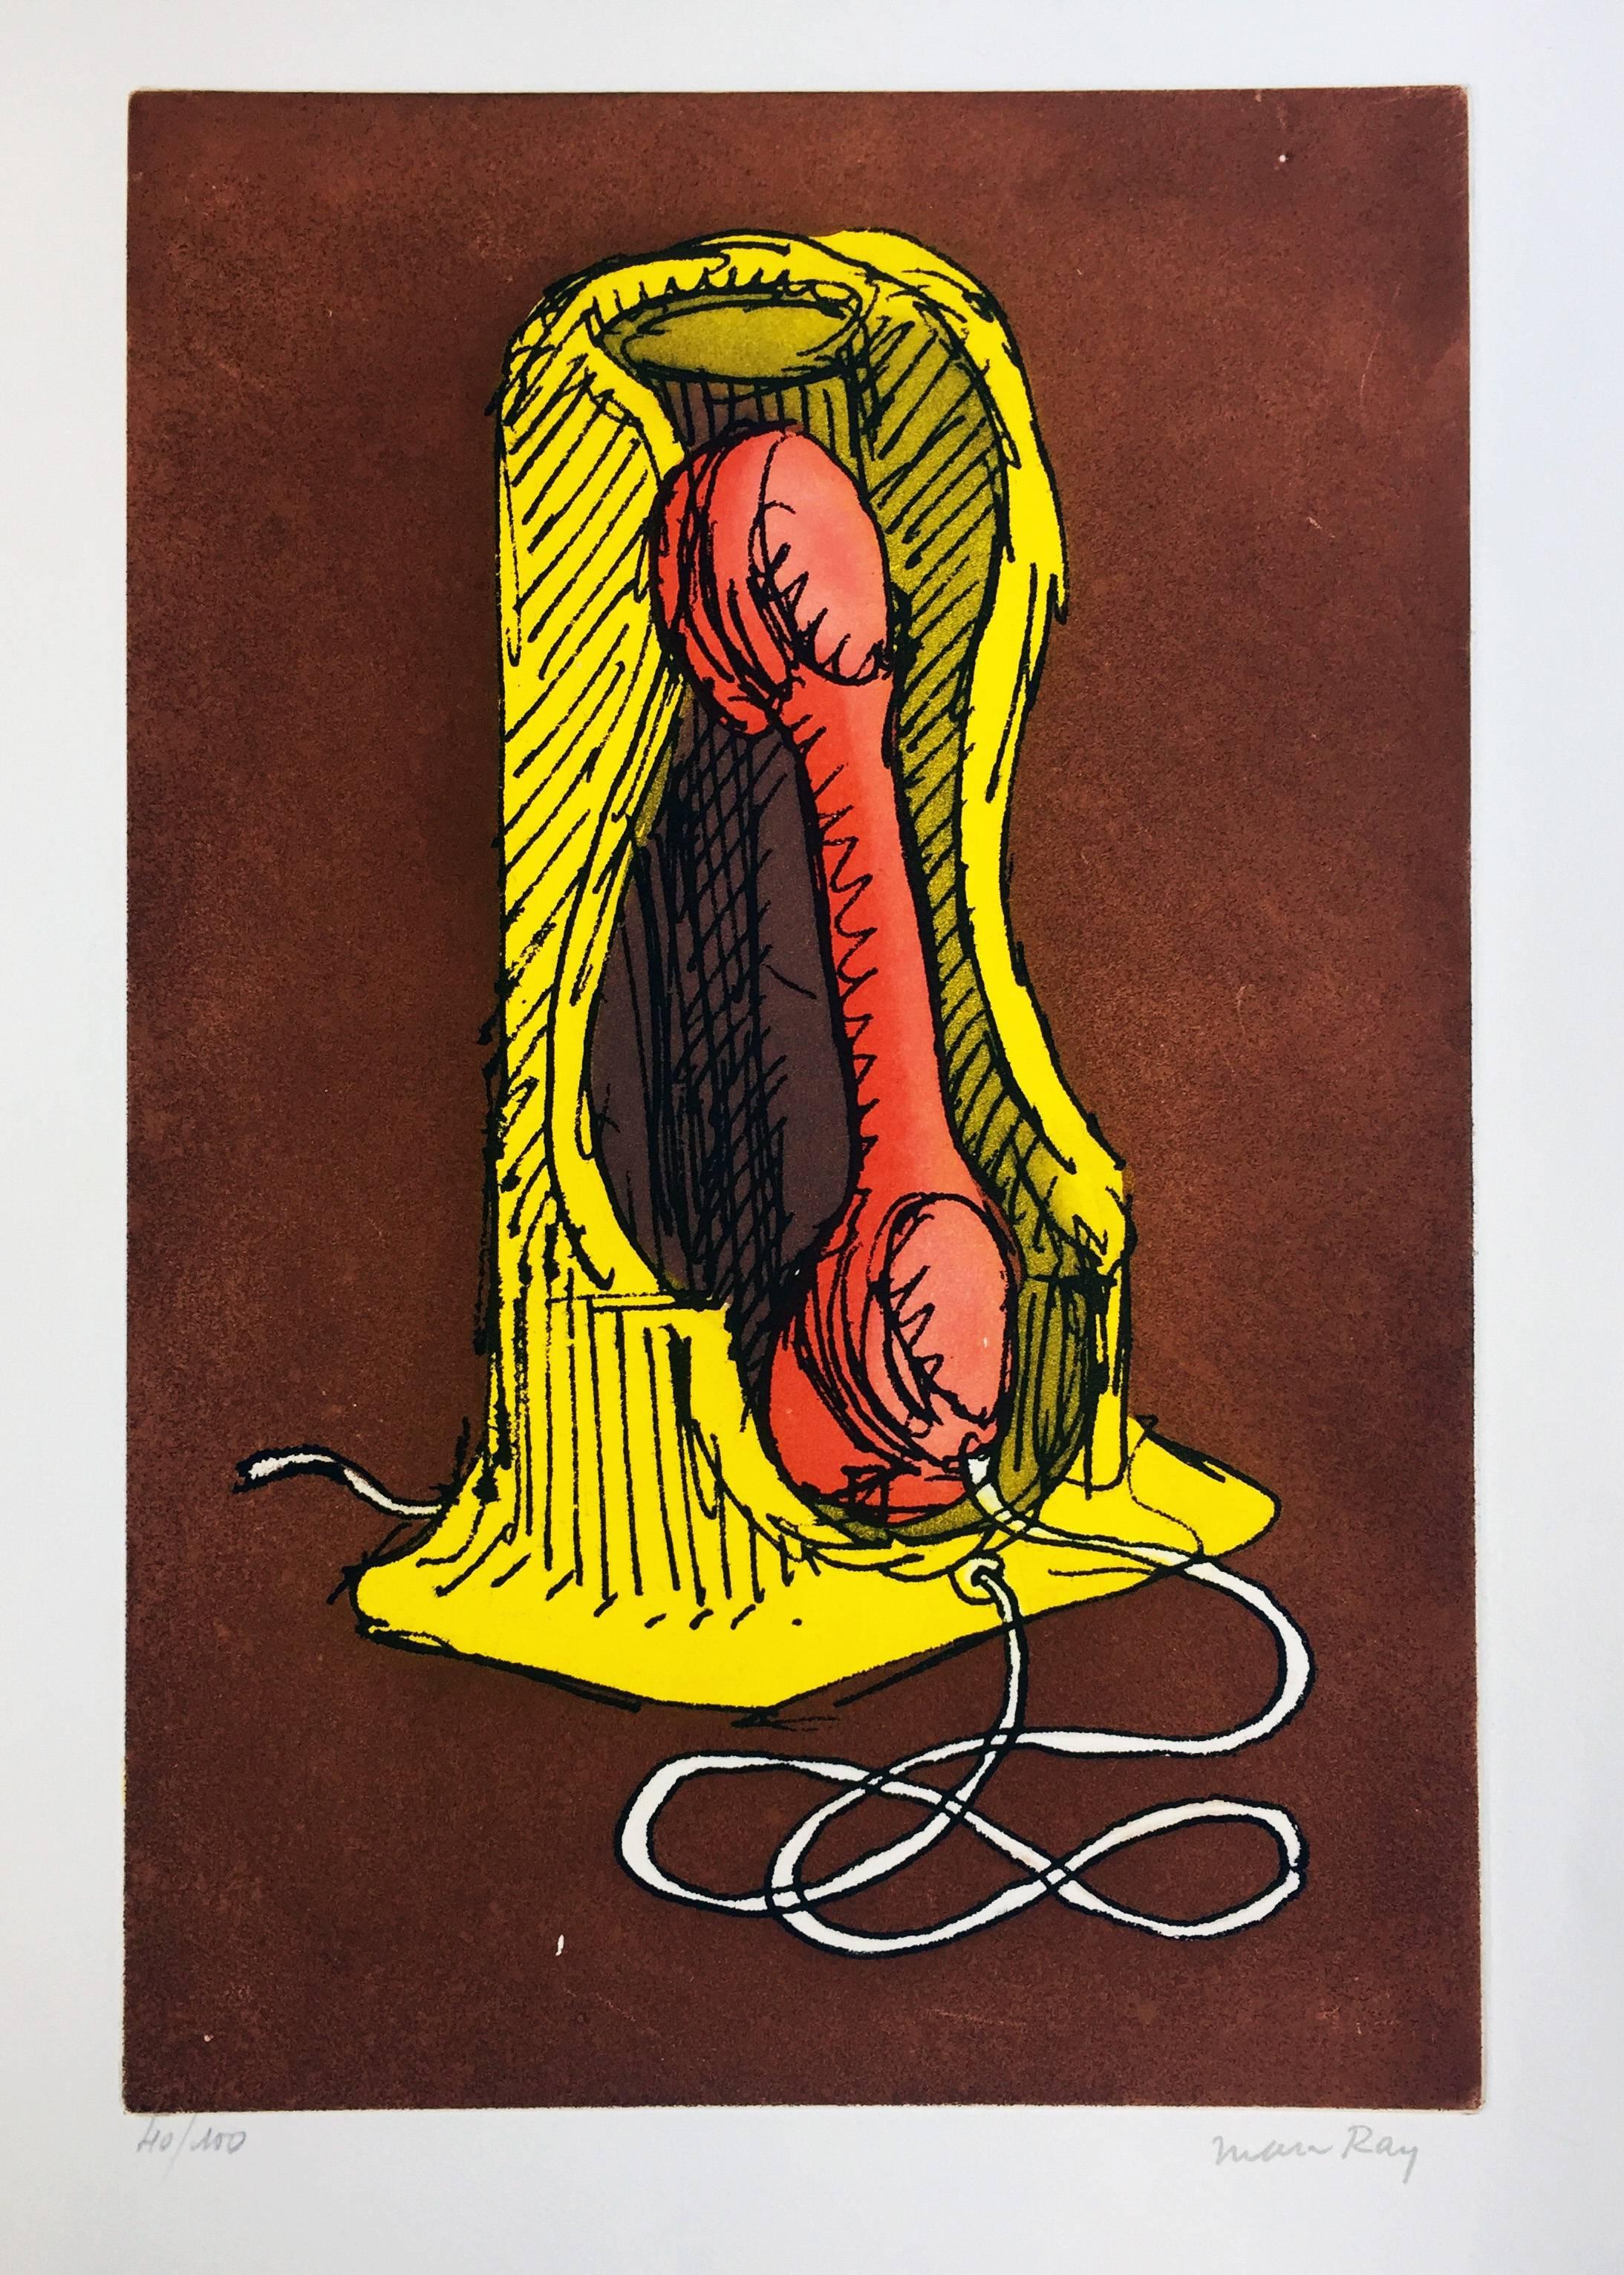 MAN RAY, Telephone, 1976

Etching with aquatint printed in colors on arches paper
13 x 20 inches
Edition of 100
Signed and numbered 40/100 in pencil 
Man Ray blind-stamp found below signature 
Published by Editions Sonet, 1976

Literature
Man Ray